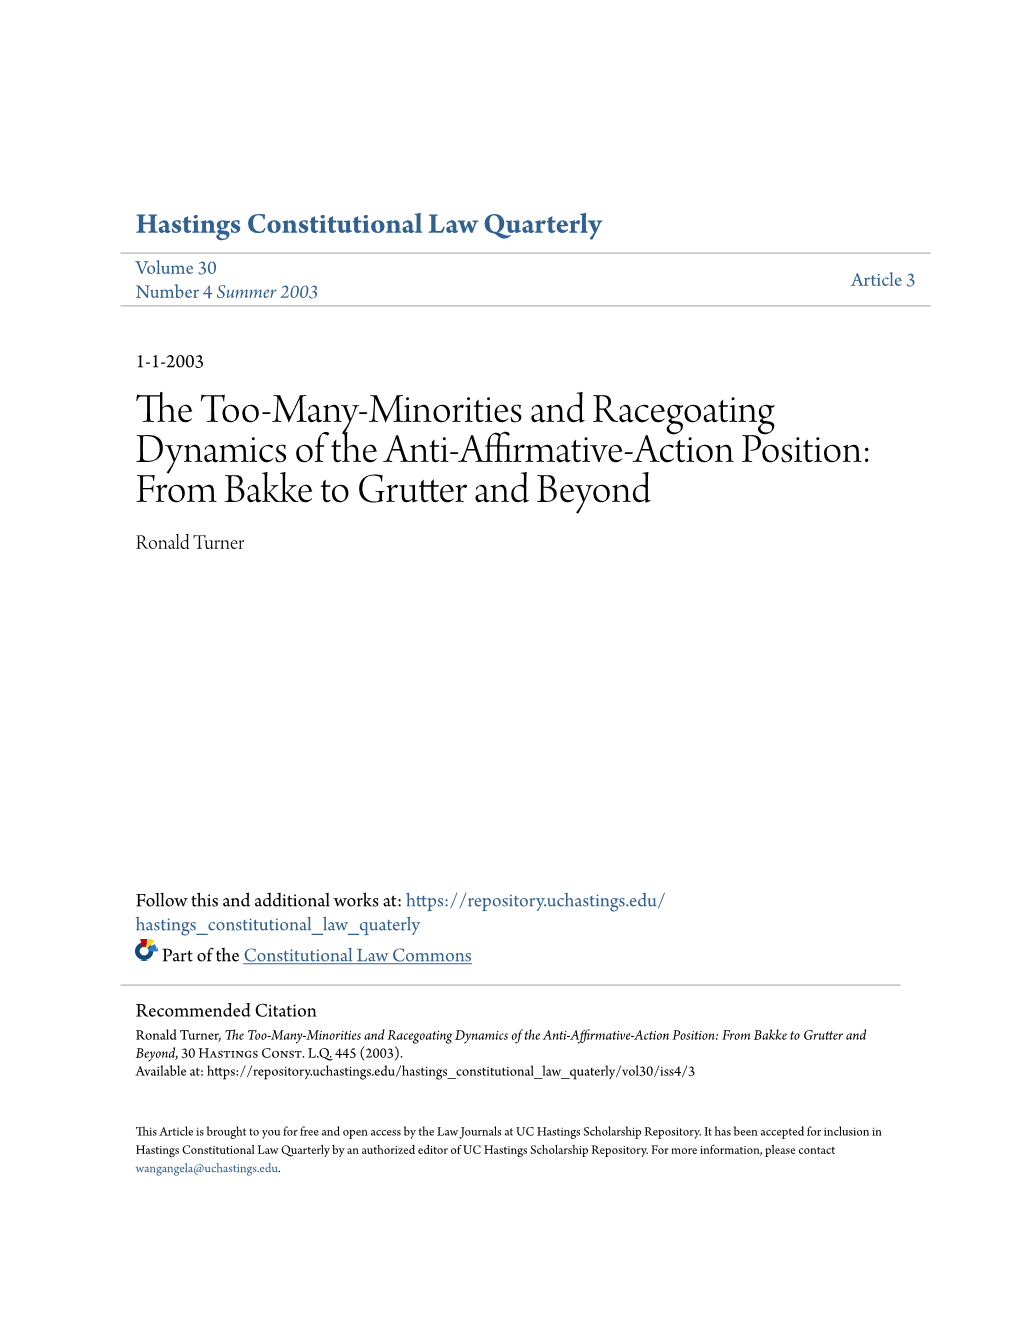 The Too-Many-Minorities and Racegoating Dynamics of the Anti-Affirmative-Action Position: from Bakke to Grutter and Beyond, 30 Hastings Const